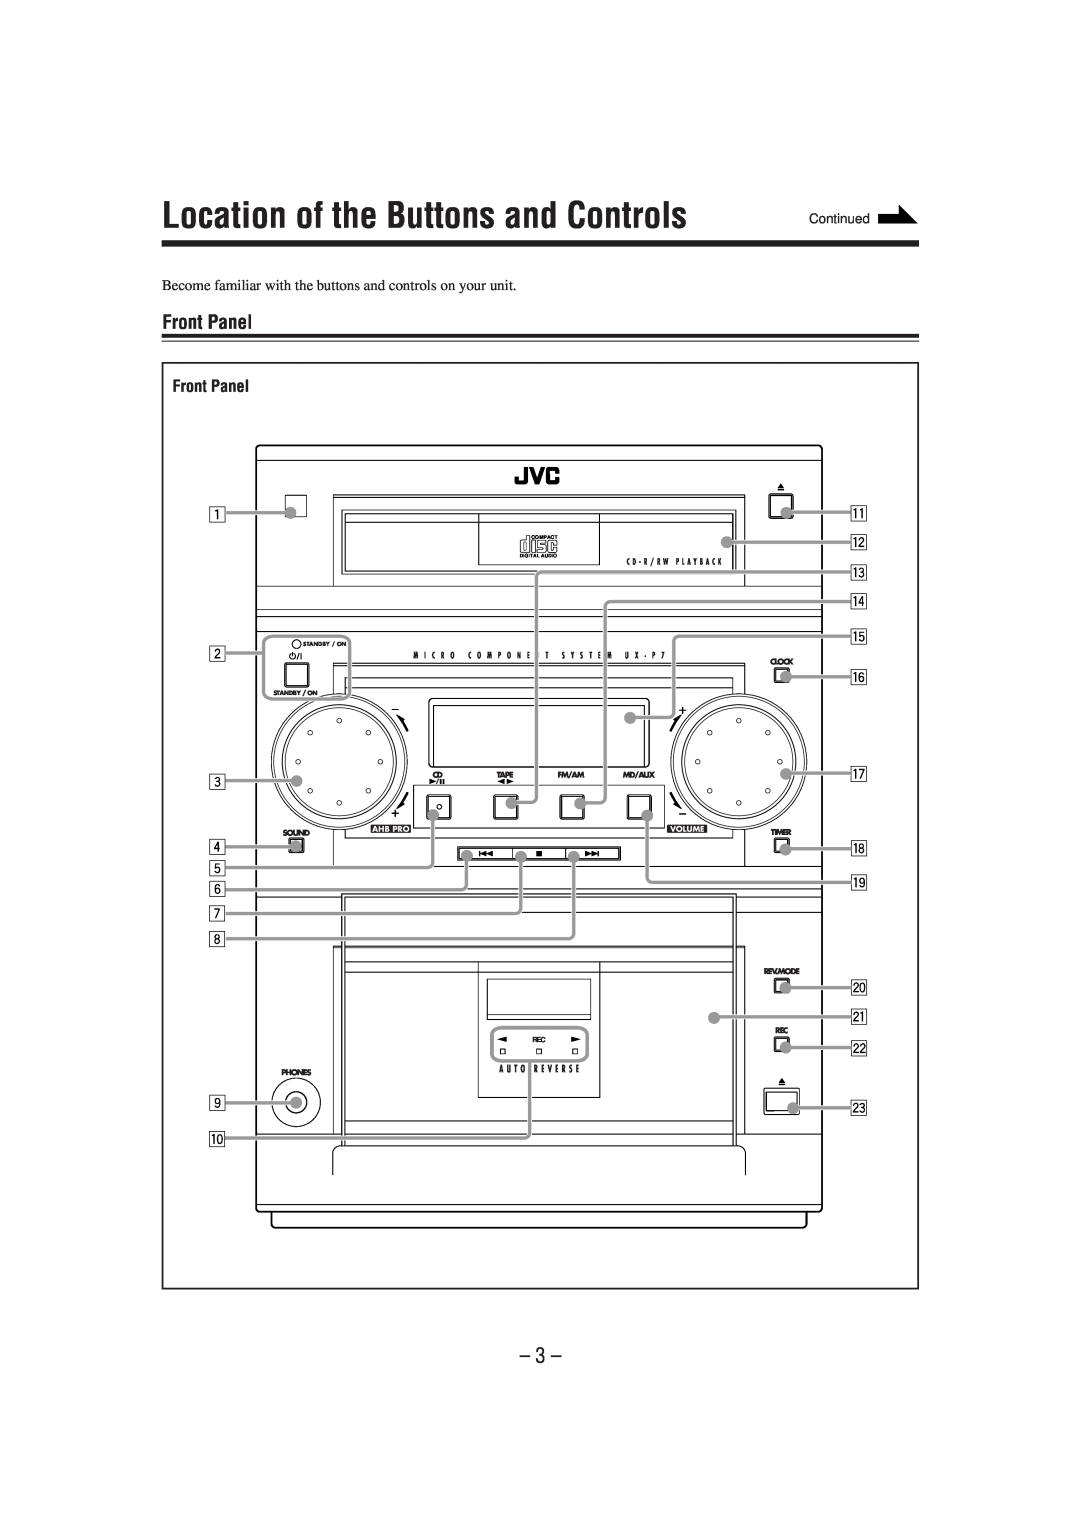 JVC UX-P7 manual Location of the Buttons and Controls, Front Panel 